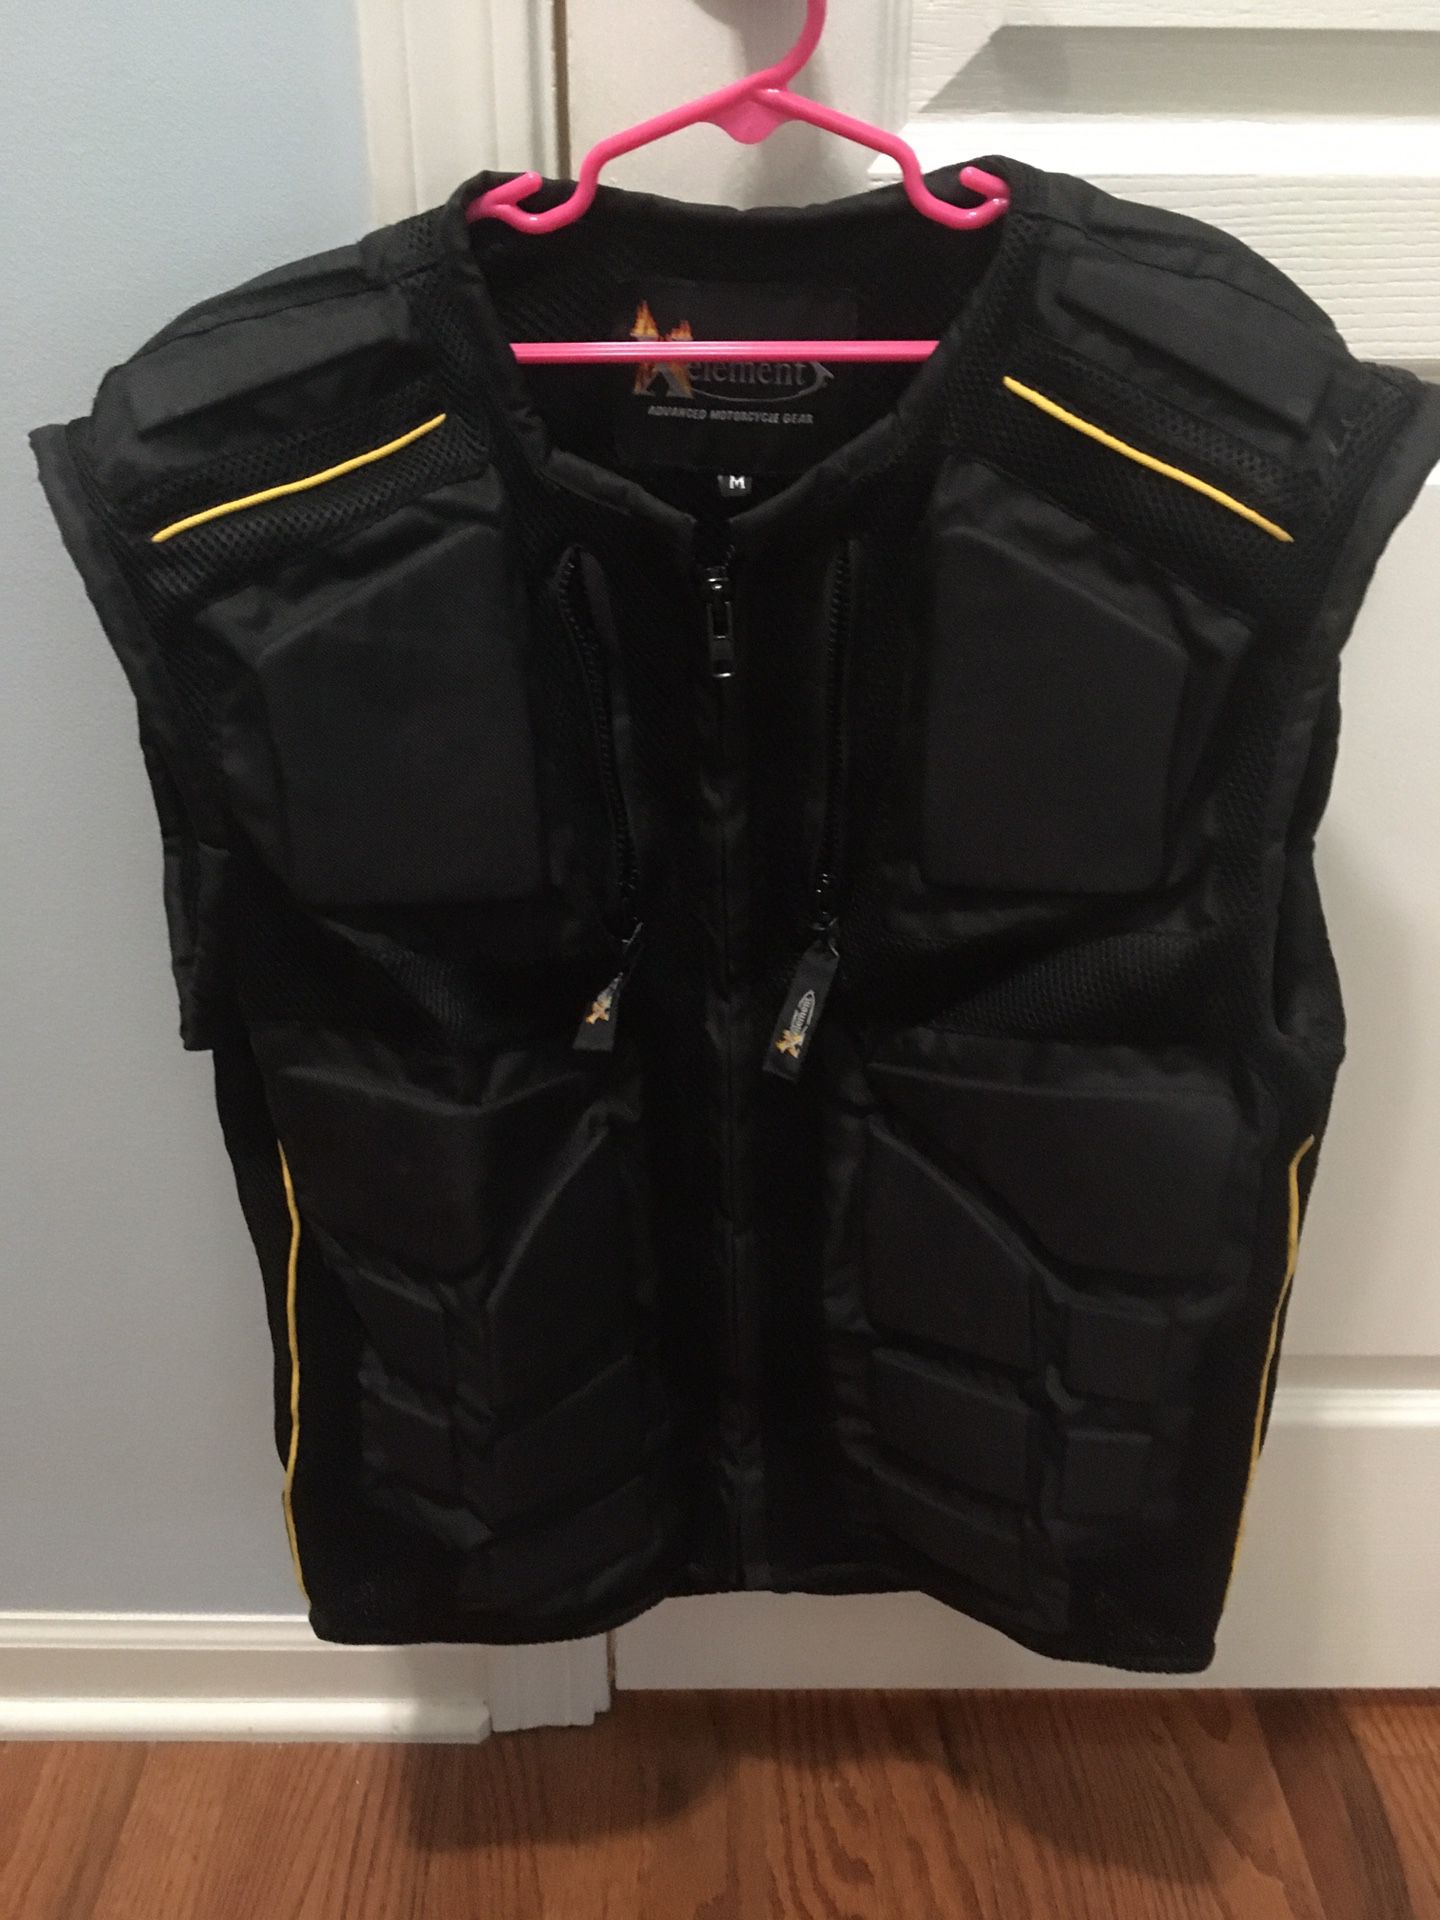 Médium motorcycle riding vest with pads - $45 obo